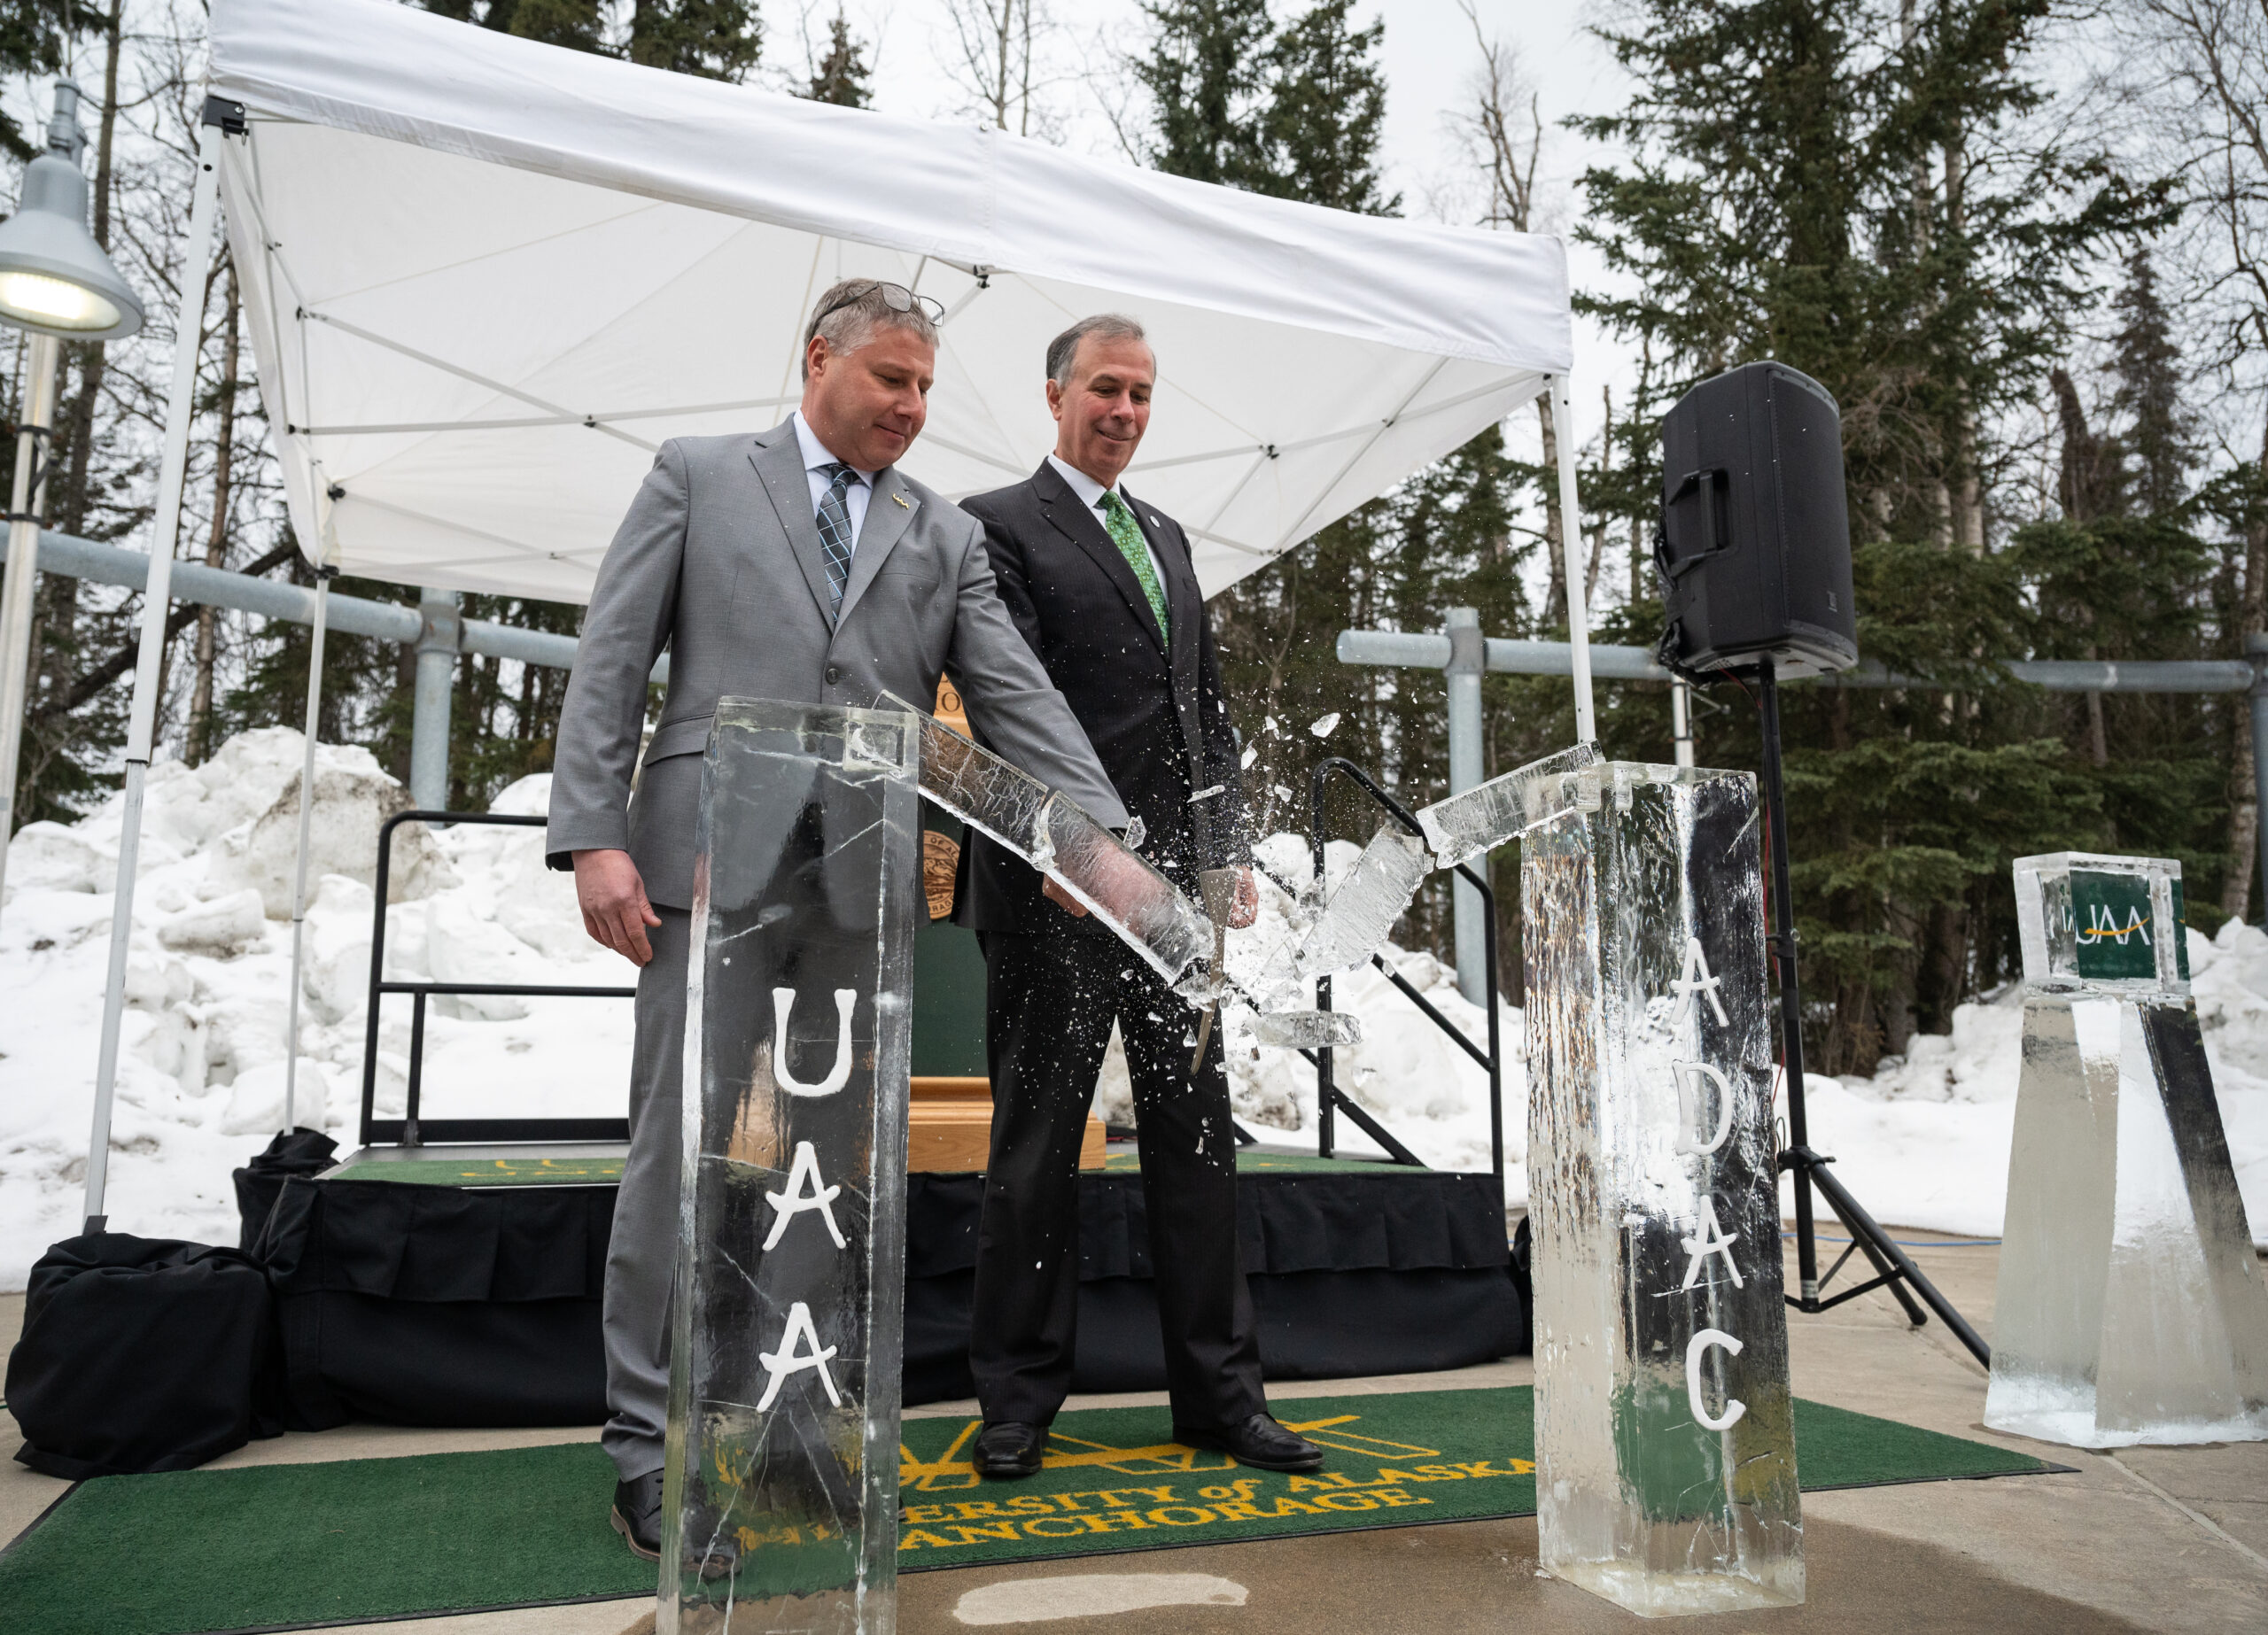 Two men in suits break an ice sculpture with an ice pick